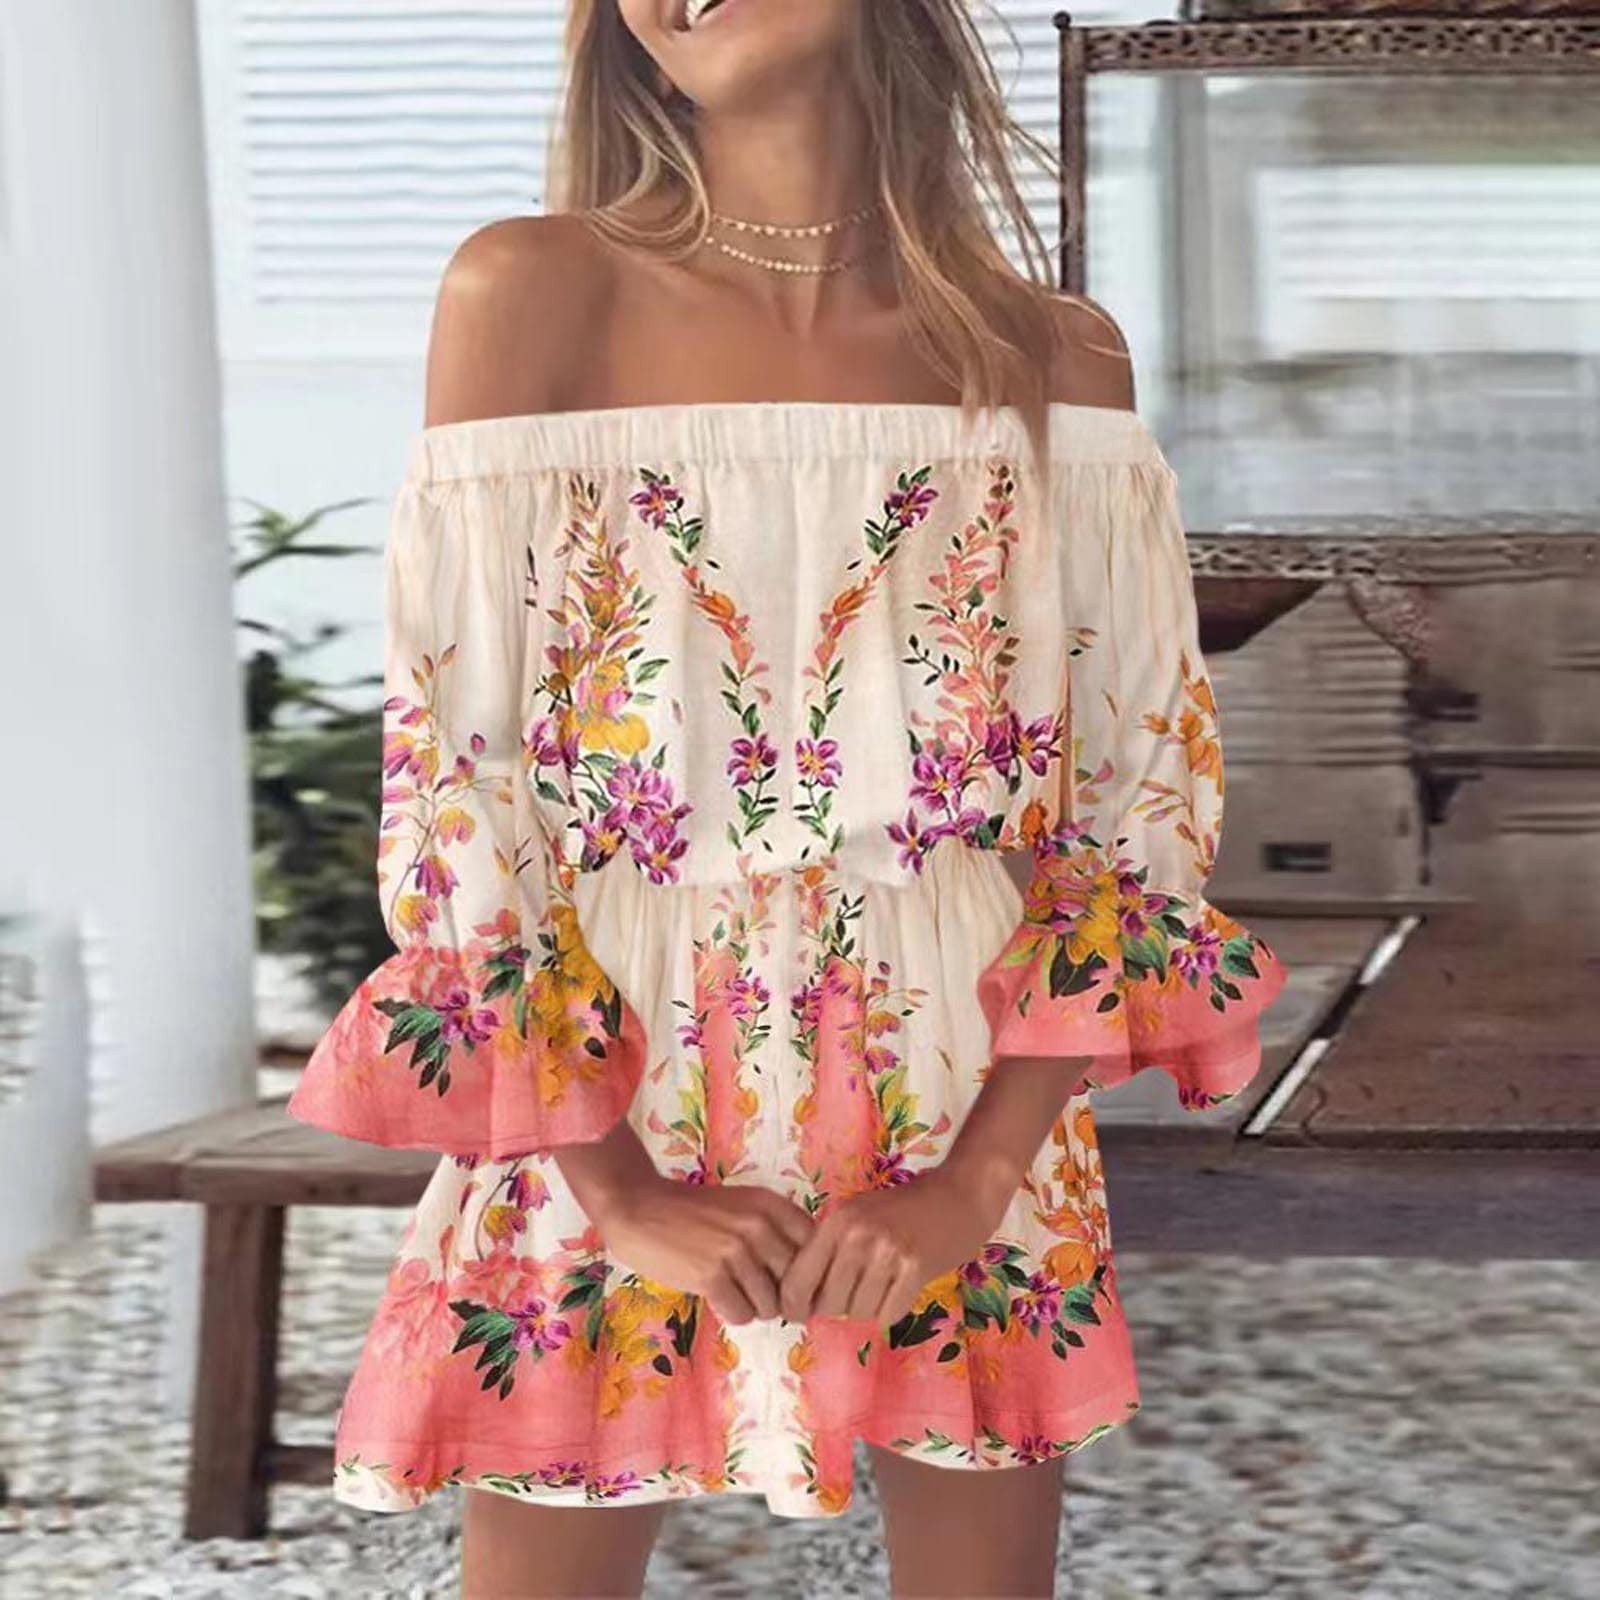 Womens Dress Solid Color Floral Short Sleeve Round Neck Off Shoulder Flowy A-line Loose Sundress Casual Daily Holiday Summer Beach Party Mini Dresses for Ladies 